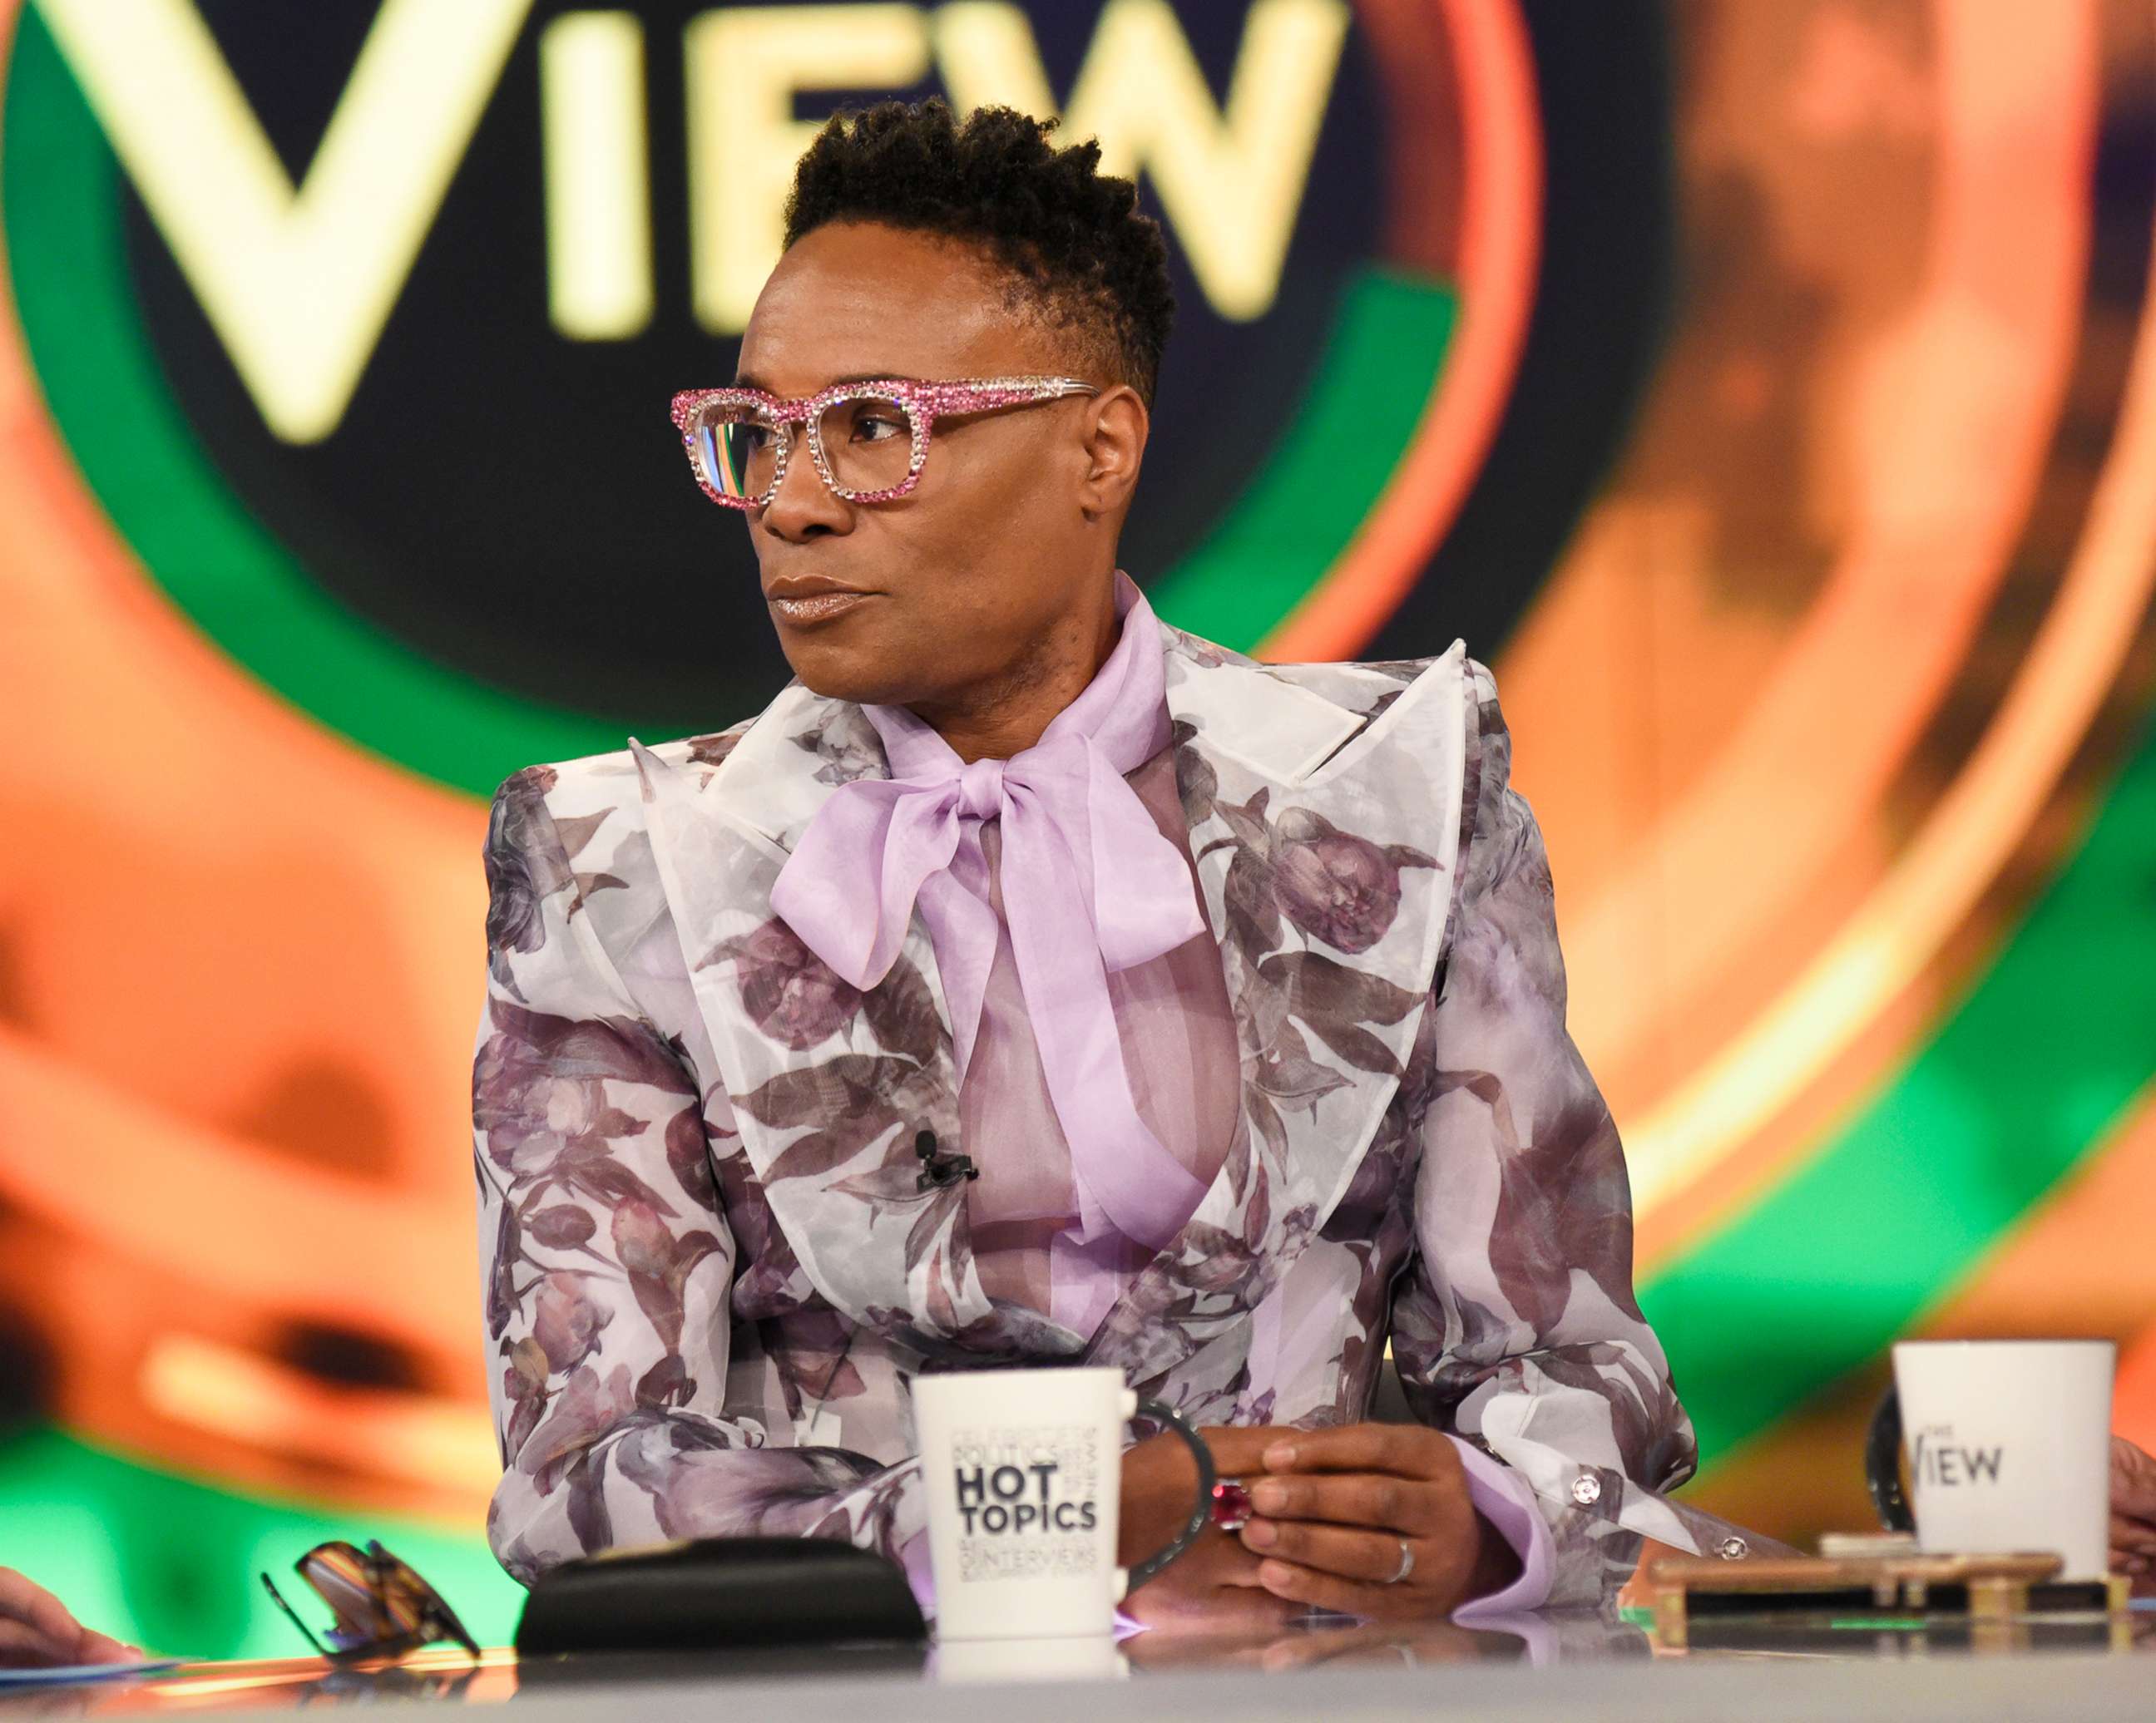 PHOTO: Billy Porter appears on "The View" to discuss the second season of his show "Pose" on Friday, June 14, 2019.